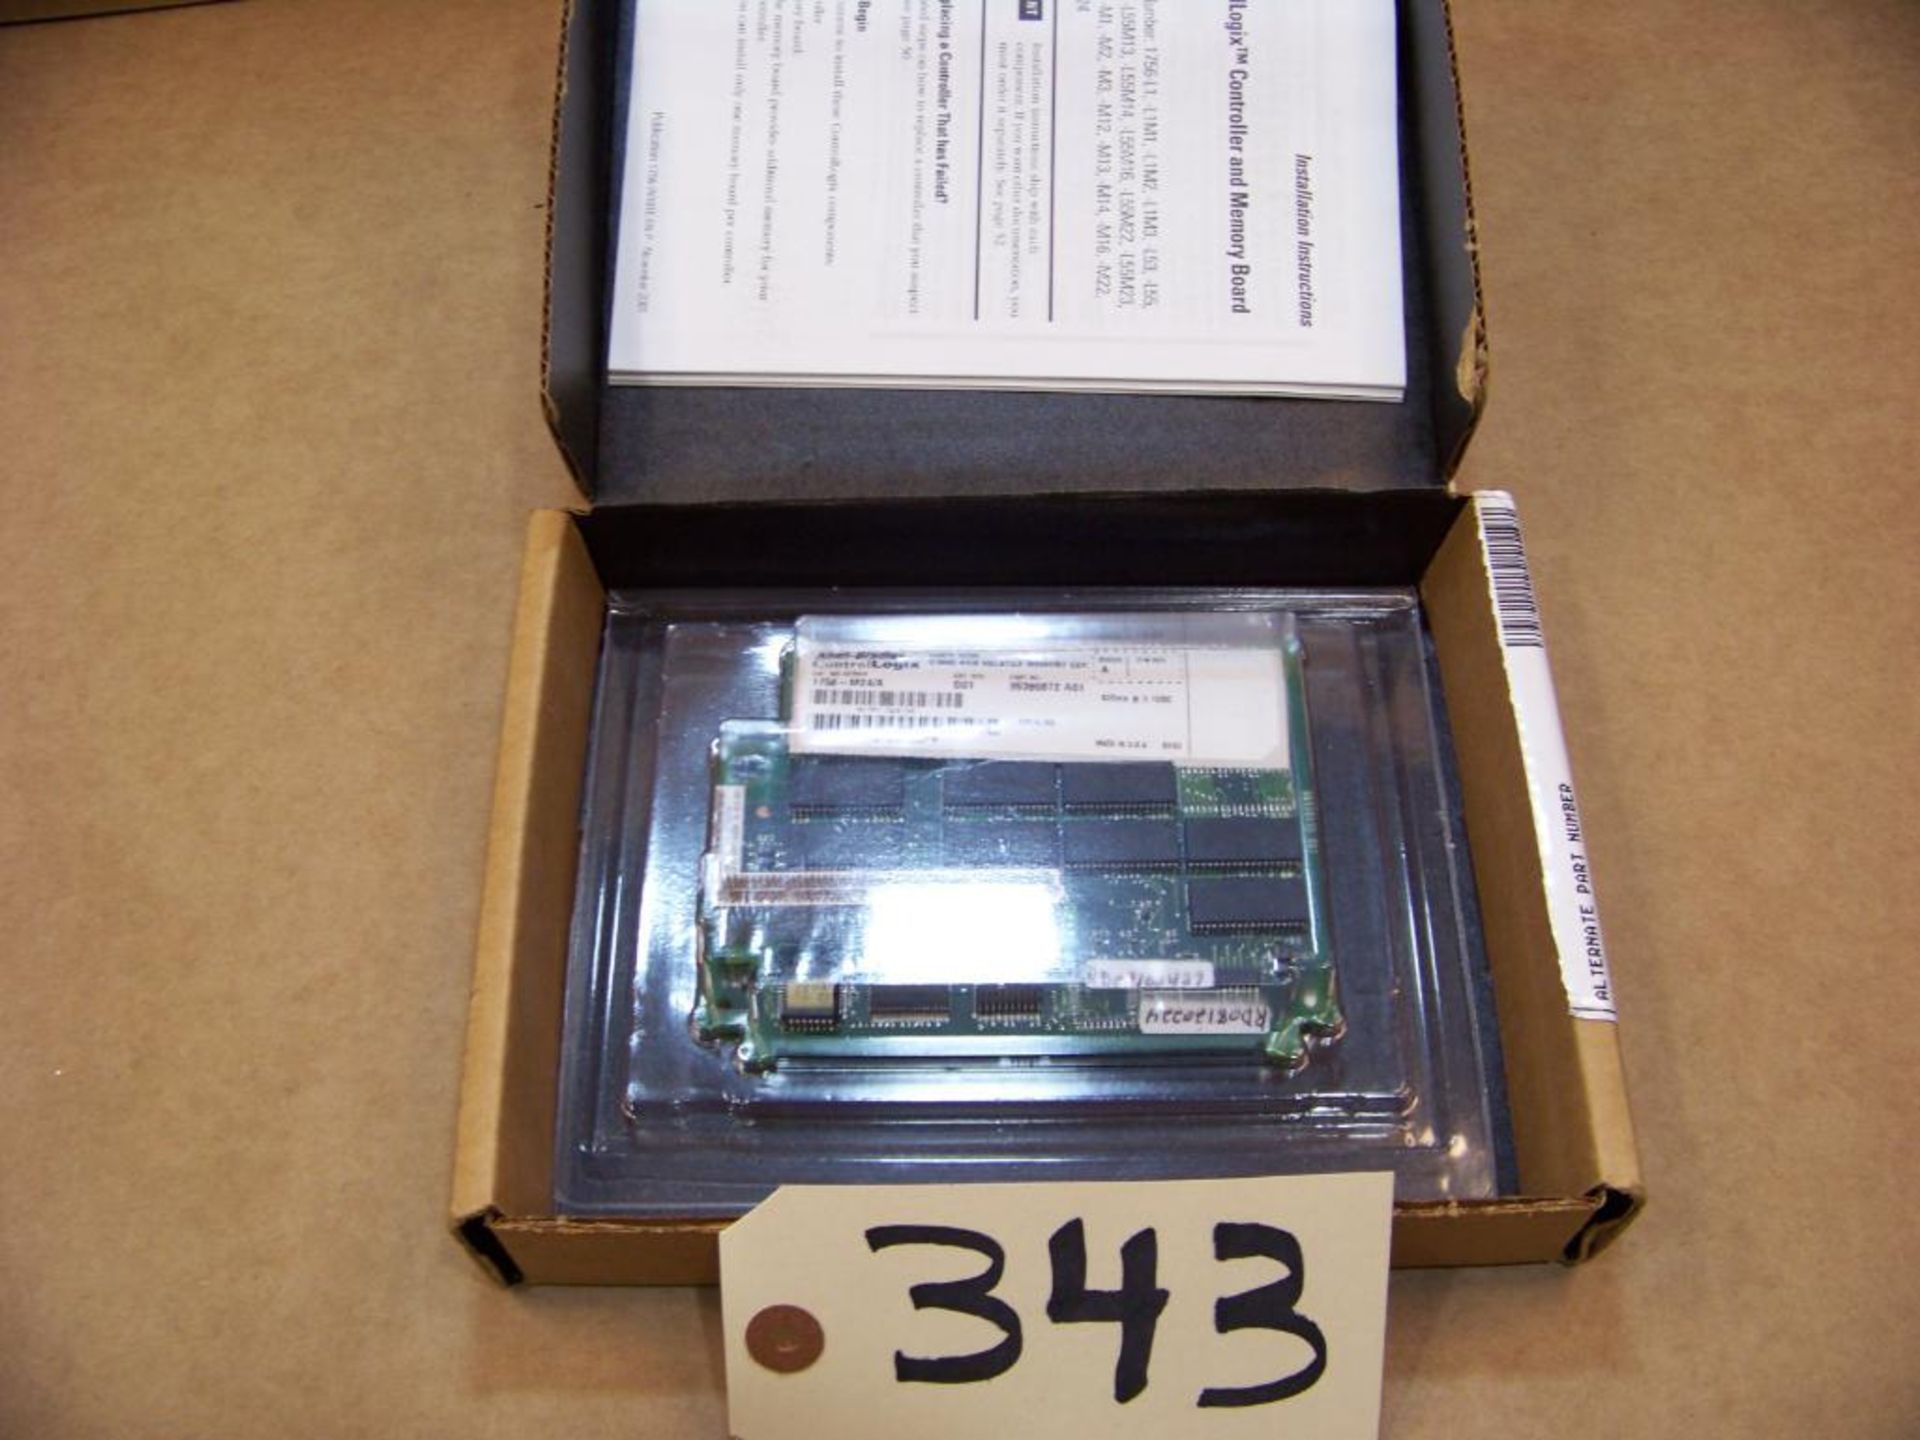 ALLEN BRADLEY CONTROLOGIX, CONTROLLER AND MEMORY BOARD, 1756-M24, NEW IN BOX